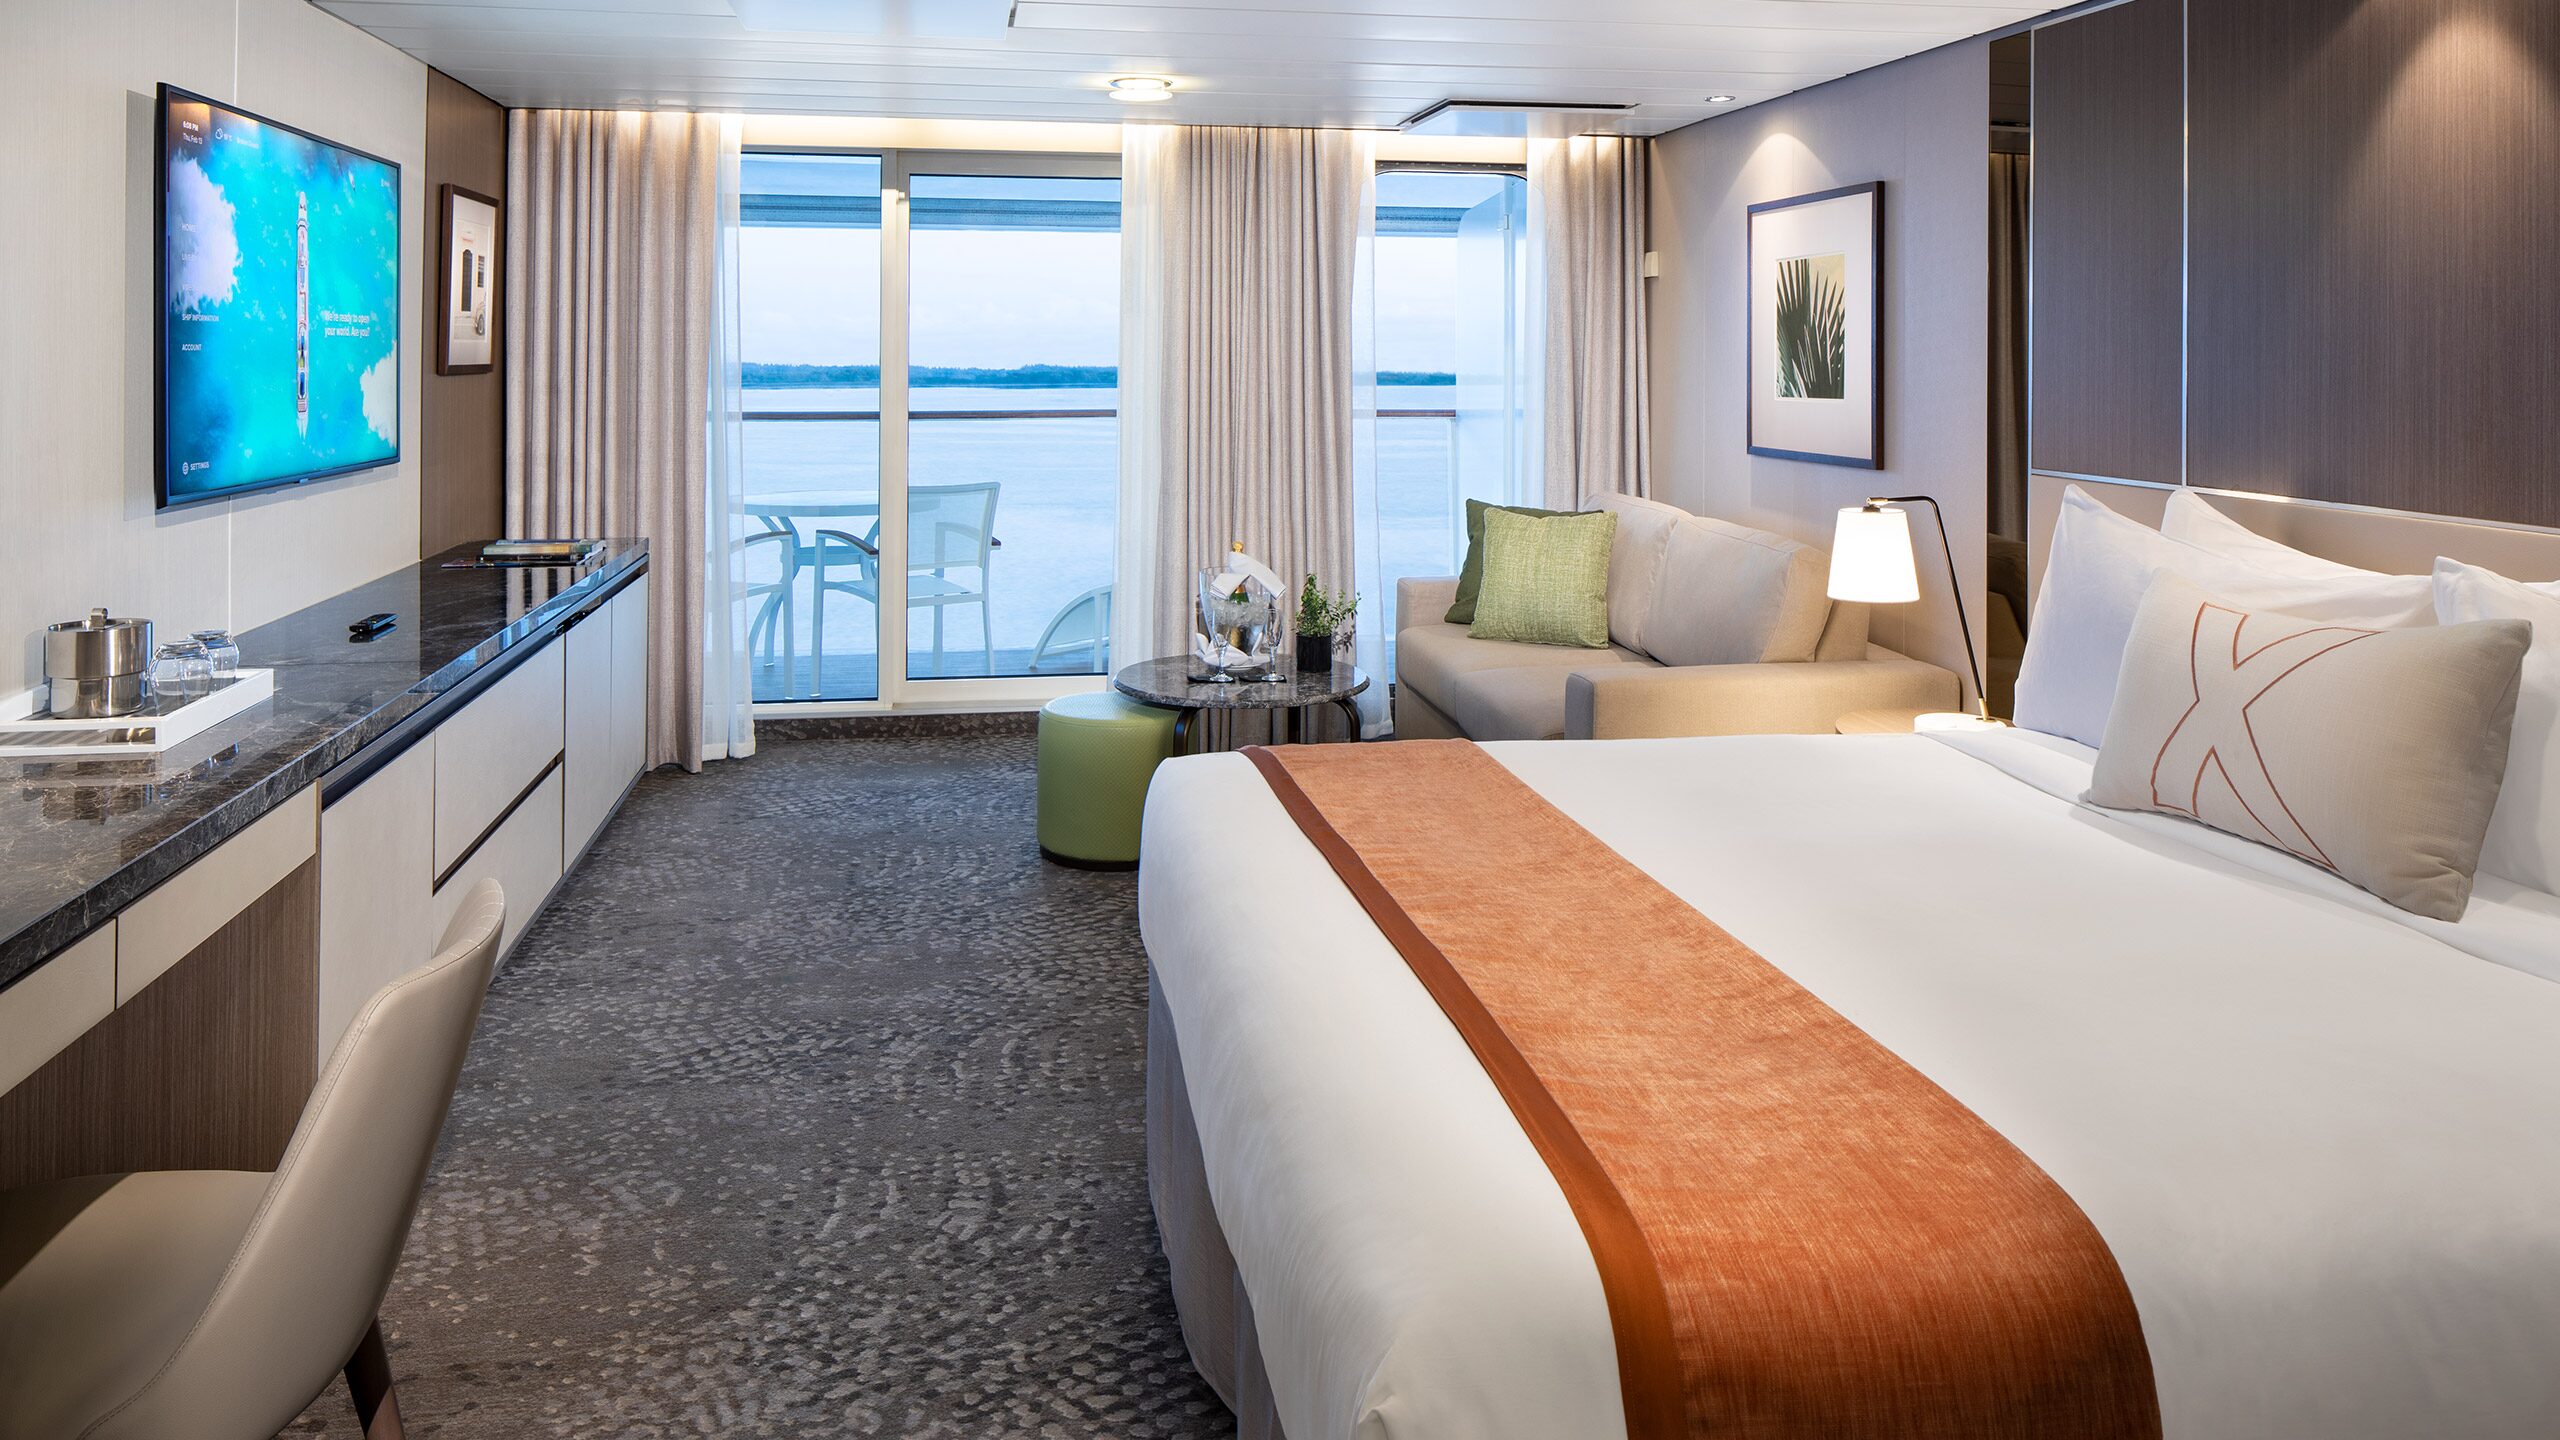 https://www.celebritycruises.com/content/dam/celebrity/new-images/staterooms/silhouette-revolutionized/silhouette-sky-suite-revolutionized-2560x1440.jpg